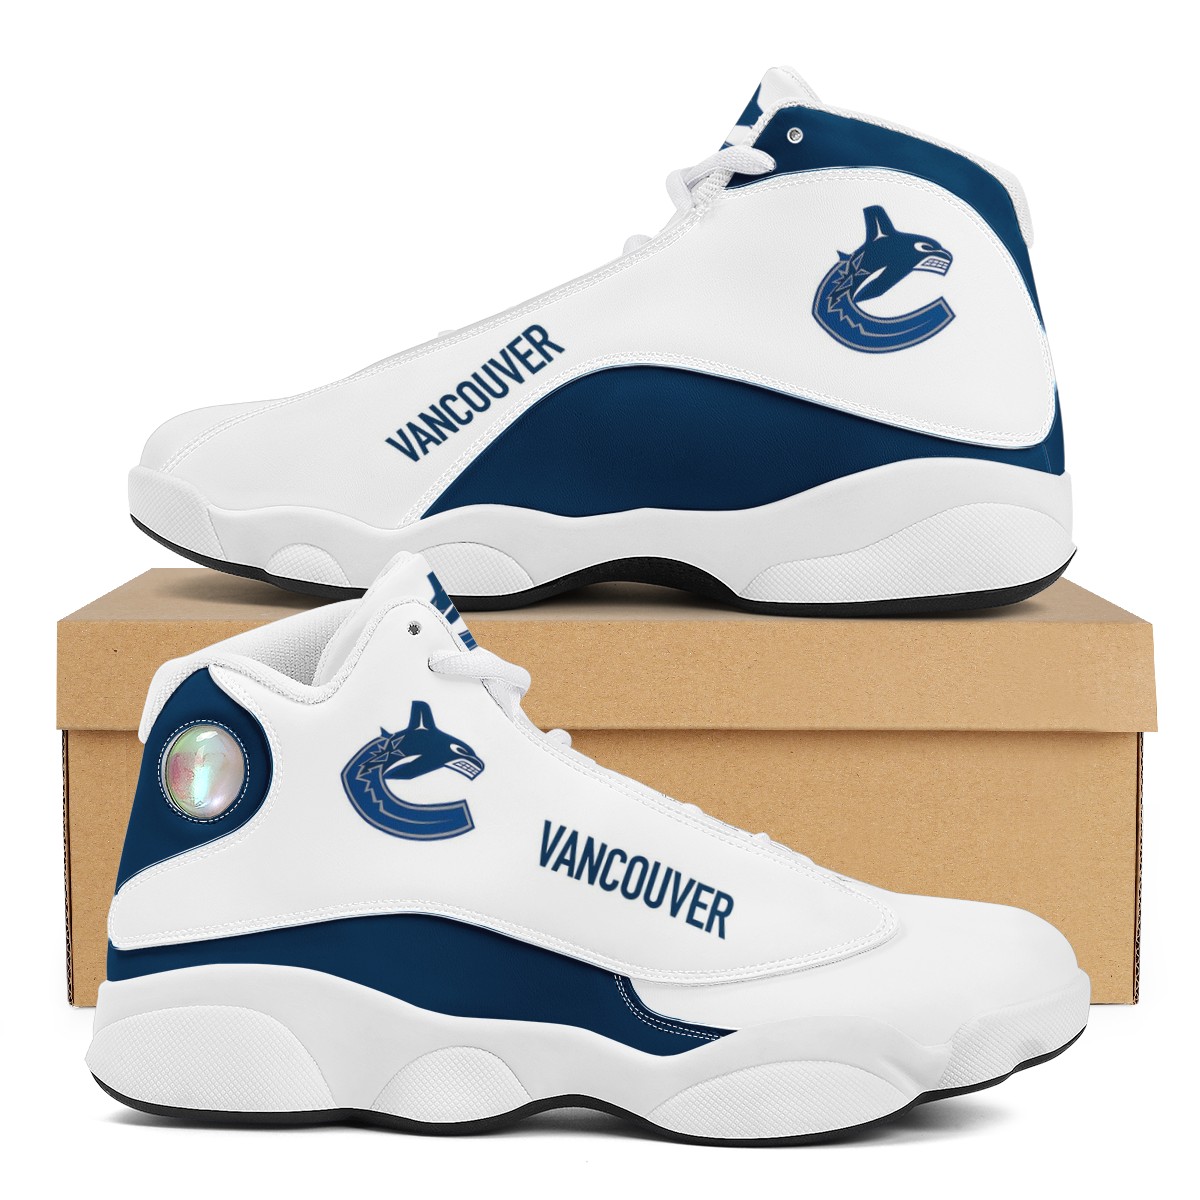 Women's Vancouver Canucks Limited Edition JD13 Sneakers 002